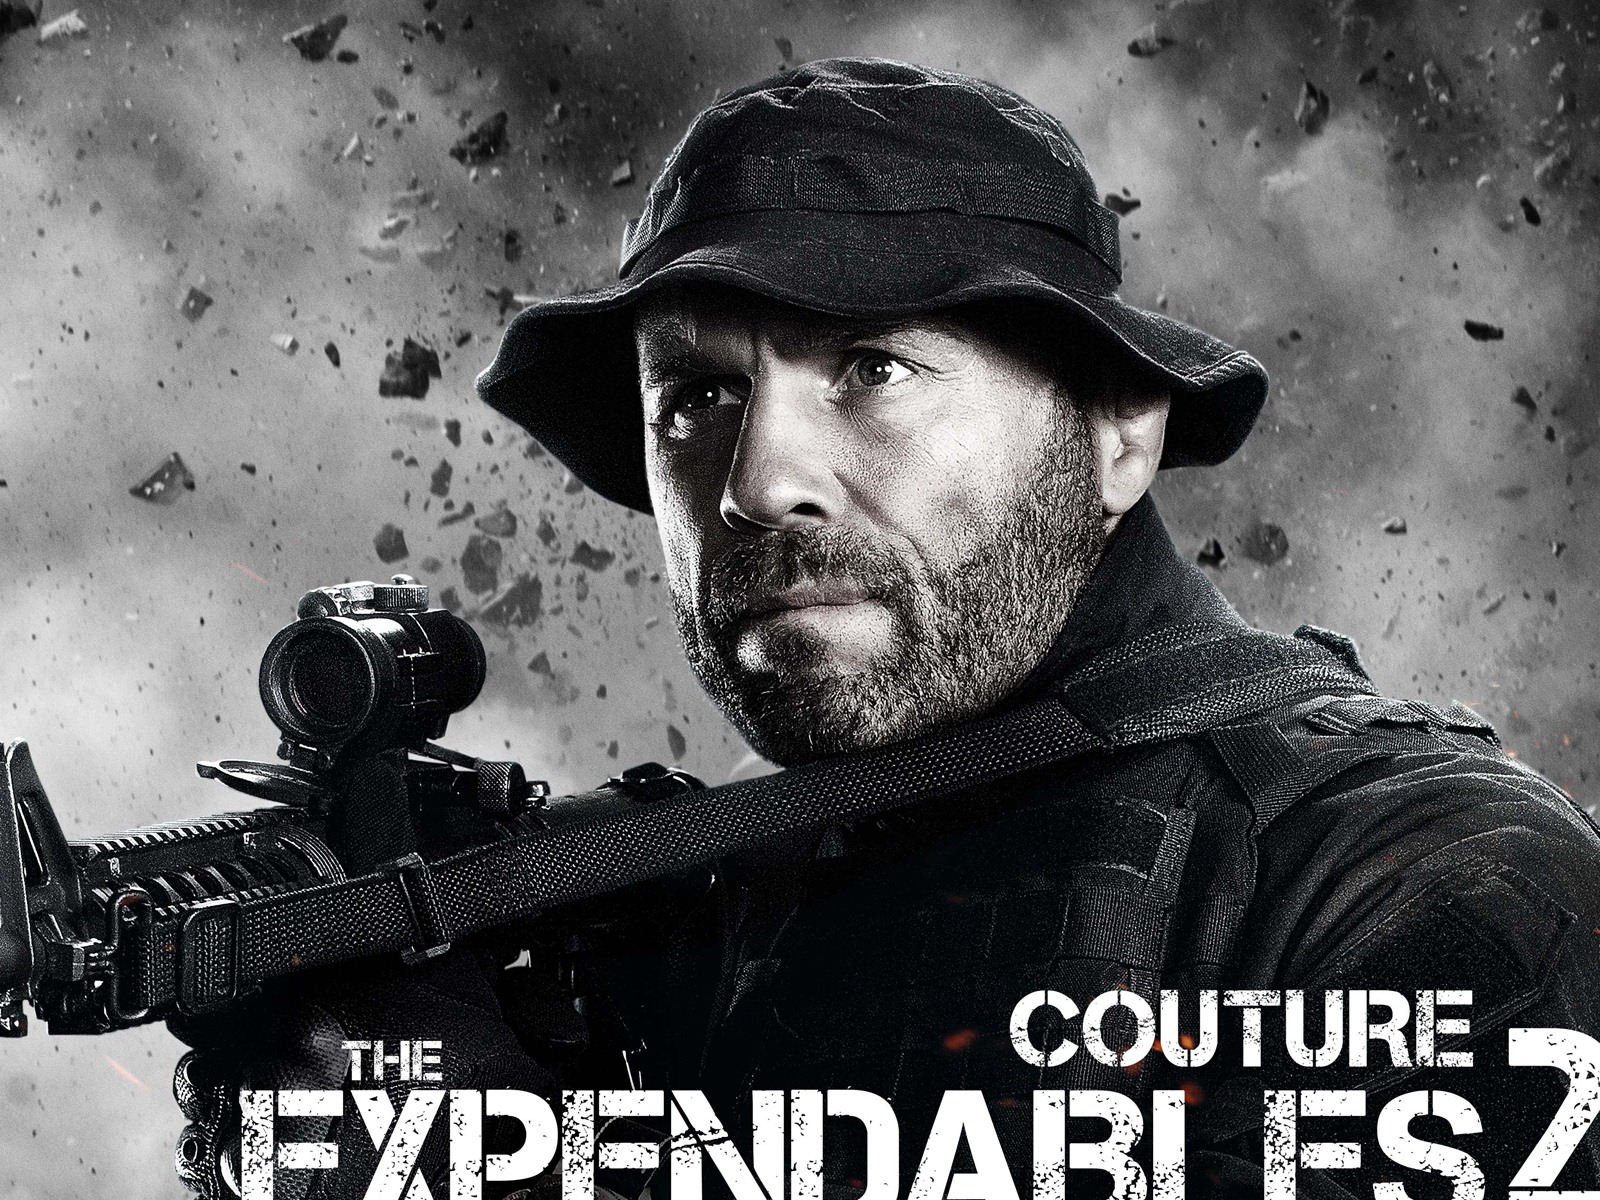 2012 Expendables2 HDの壁紙 #8 - 1600x1200